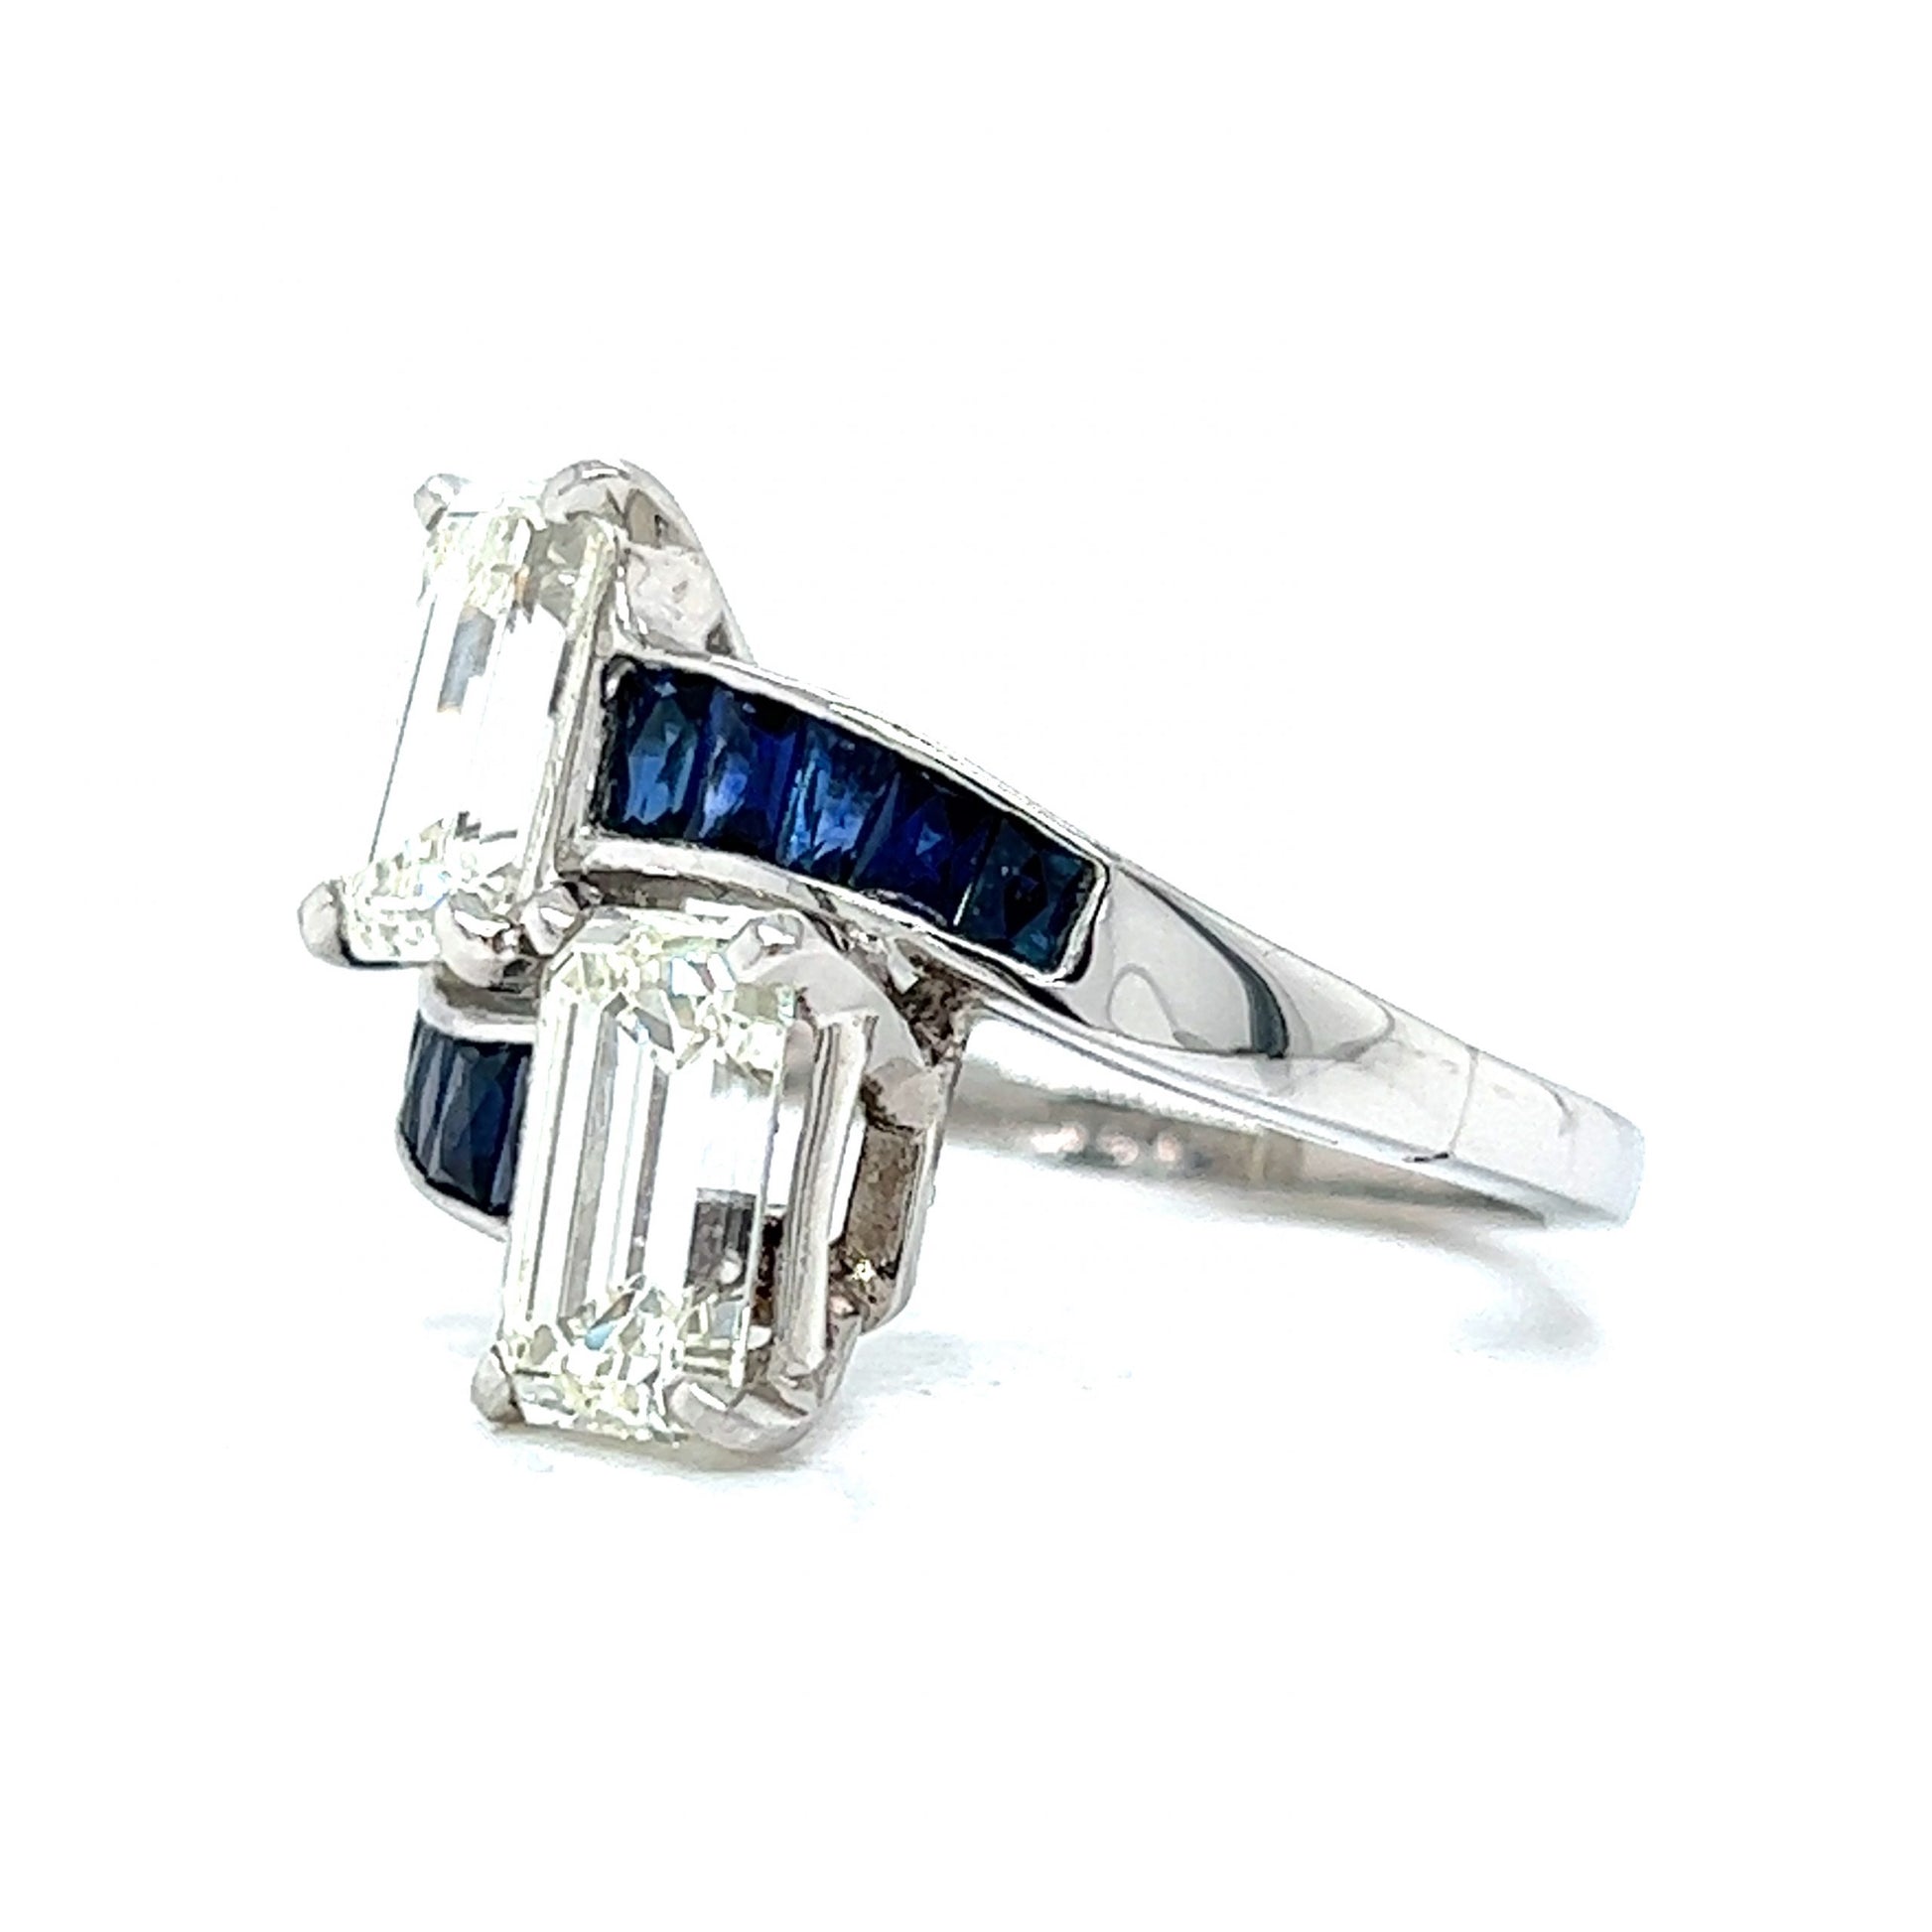 Diamond & Sapphire Bypass Engagement Ring in PlatinumComposition: PlatinumRing Size: 5.75Total Diamond Weight: 3.00 ctTotal Gram Weight: 8.0 g